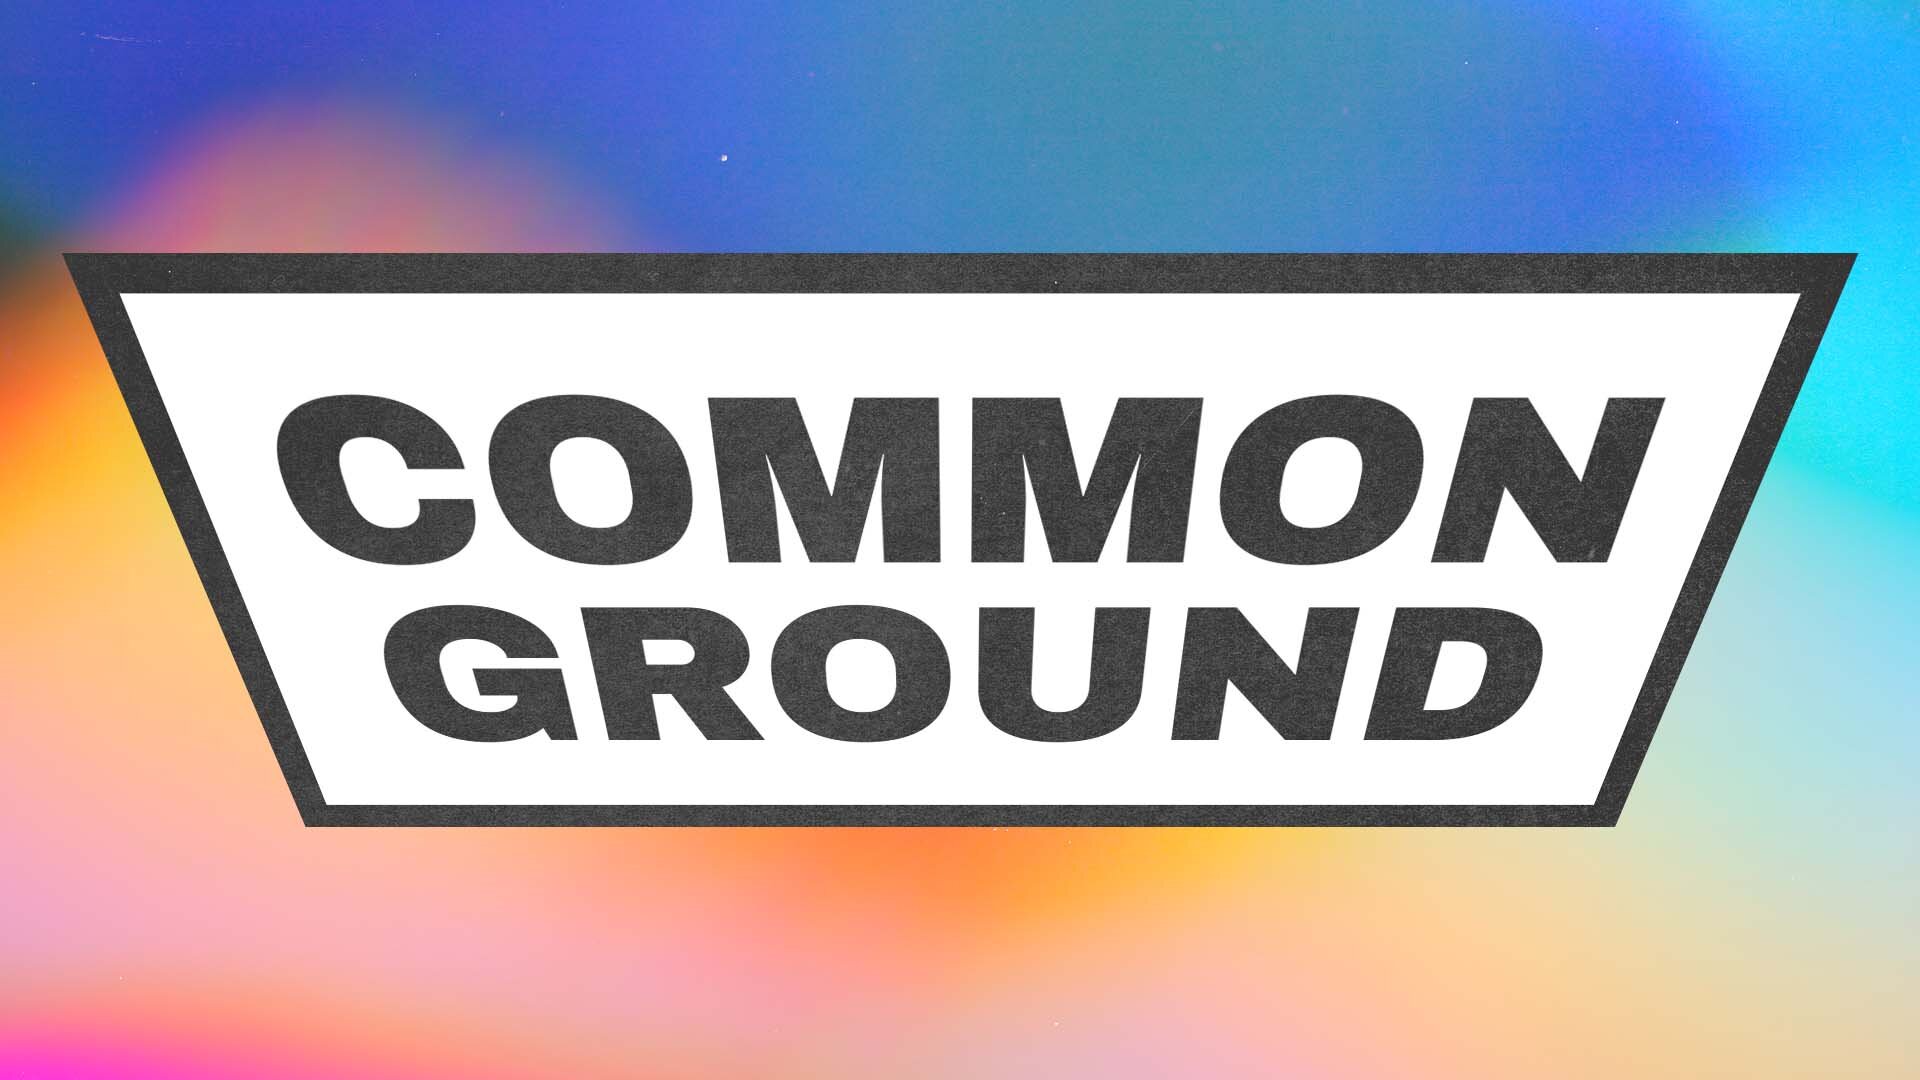 Common Ground Wallpapers